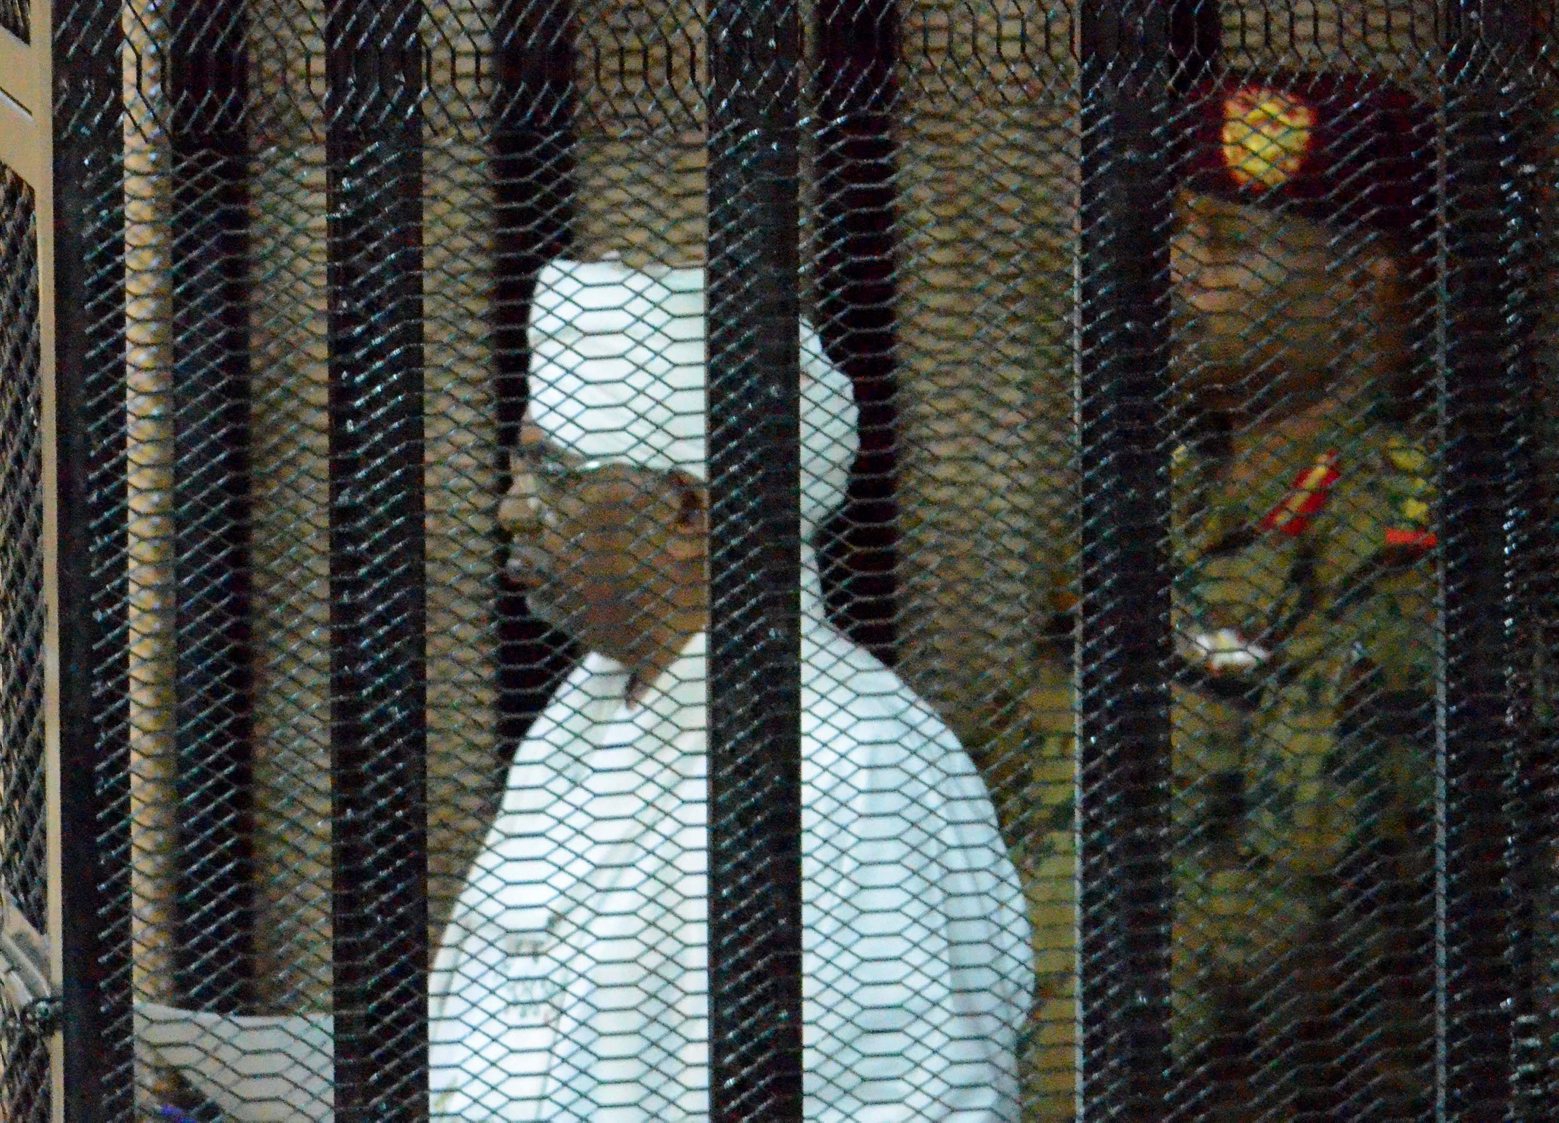 epa07780604 Sudan's ousted president Omar Hassan al-Bashir (L) stands in a cage during his trial at a courtroom in Khartoum, Sudan, 19 August 2019. Al-Bashir was ousted on 11 April after months of protests and some 30 years in power. According to local media reports, al-Bashir returned to court on 19 August to answer for corruption charges. The trial resumed two days after the military council and the opposition signed a power sharing deal, hoping to end months of crisis.  EPA/STRINGER SUDAN FORMER PRESIDENT TRIAL